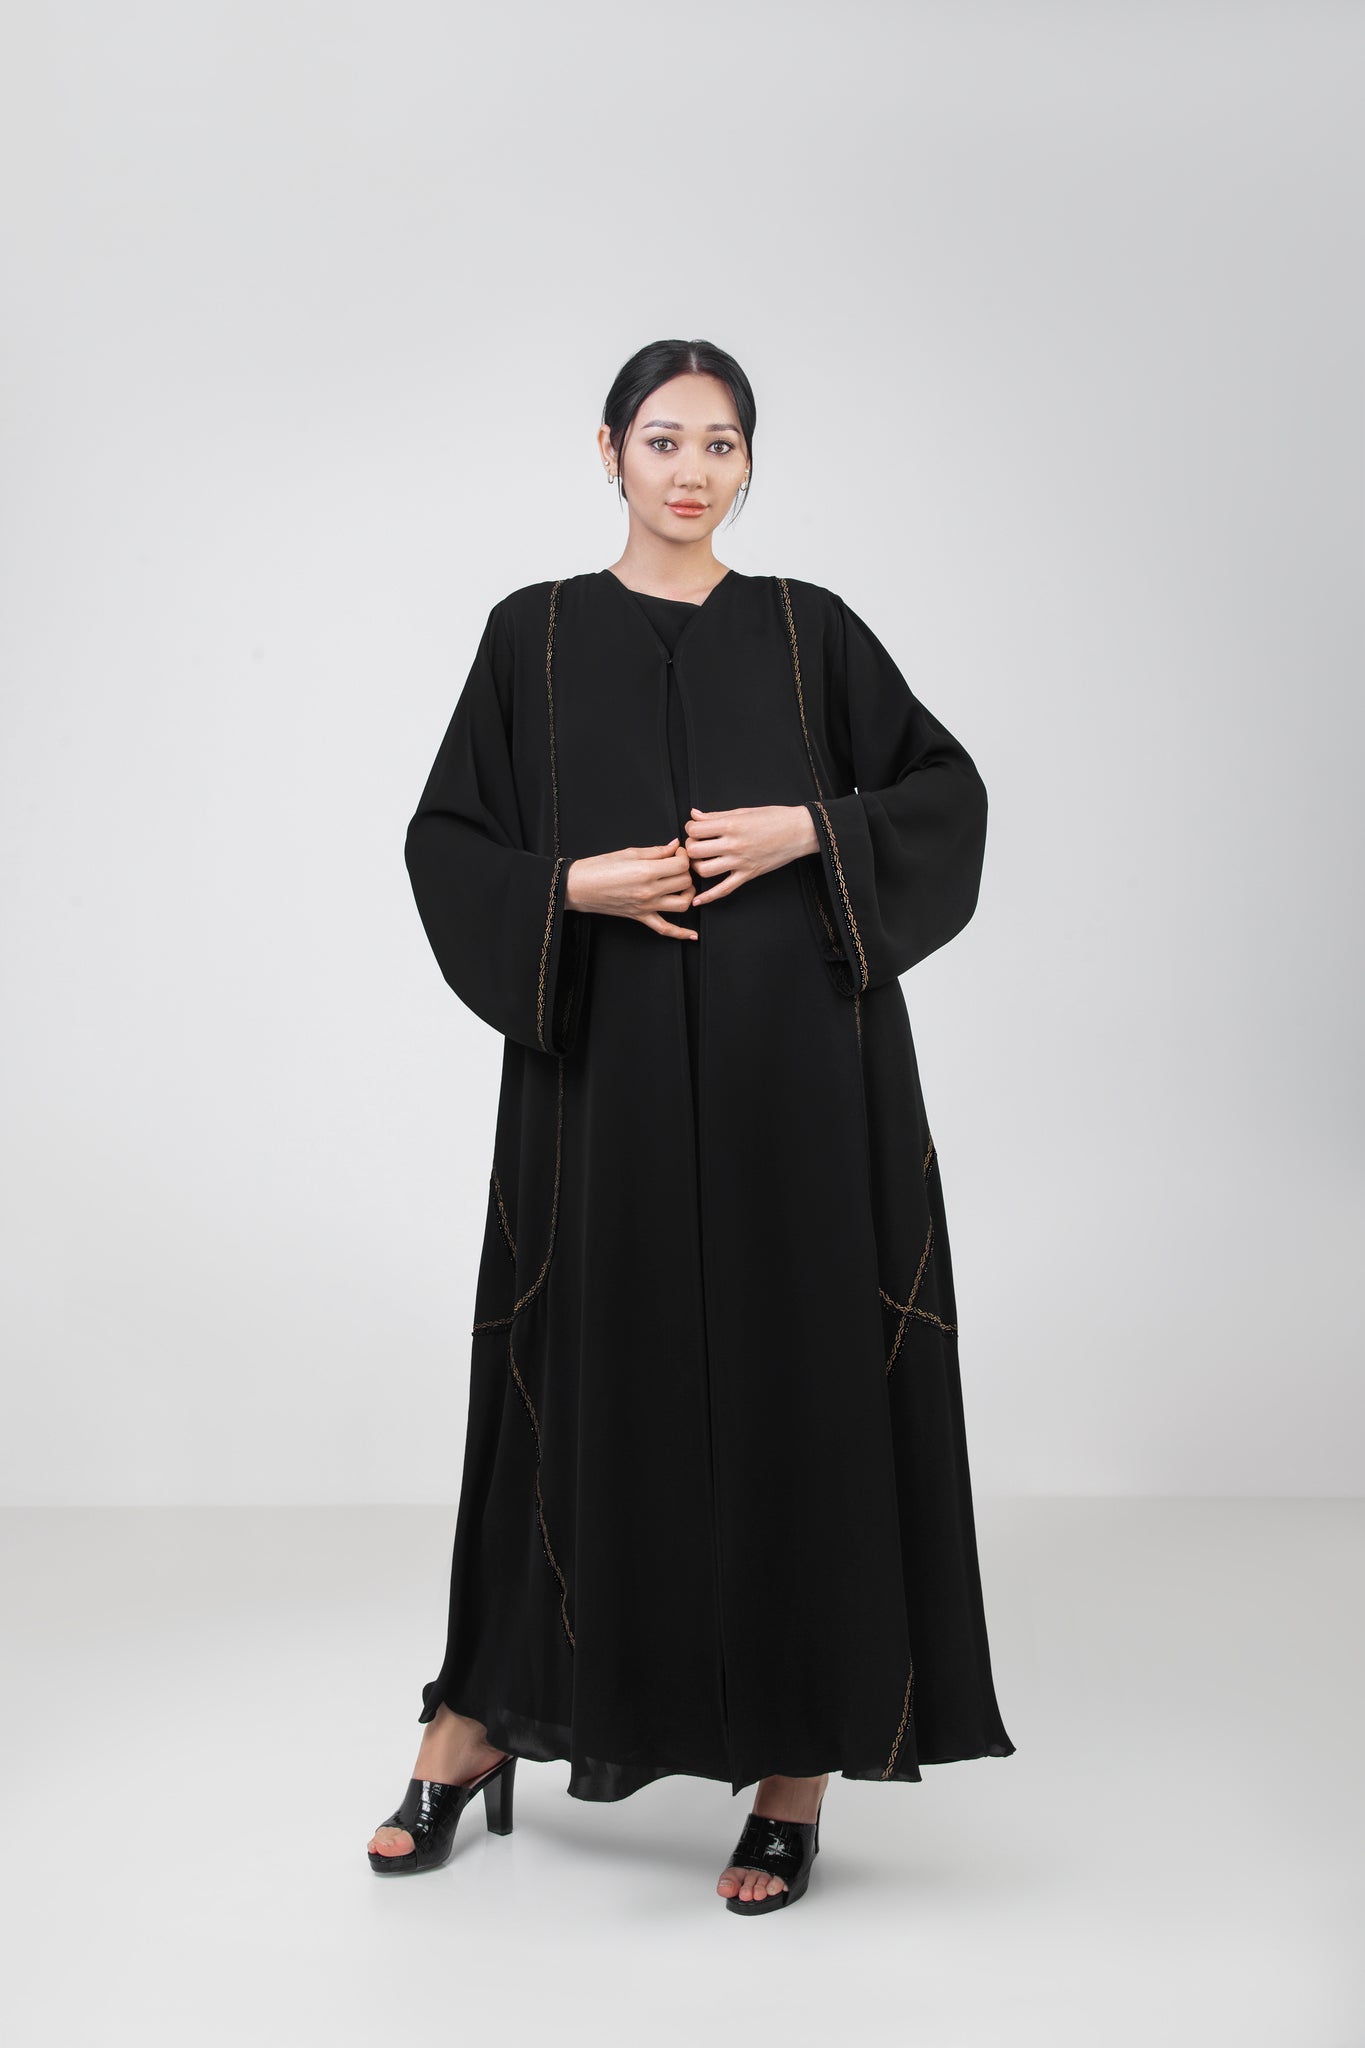 Open Modest Abaya With Gold Strips Design